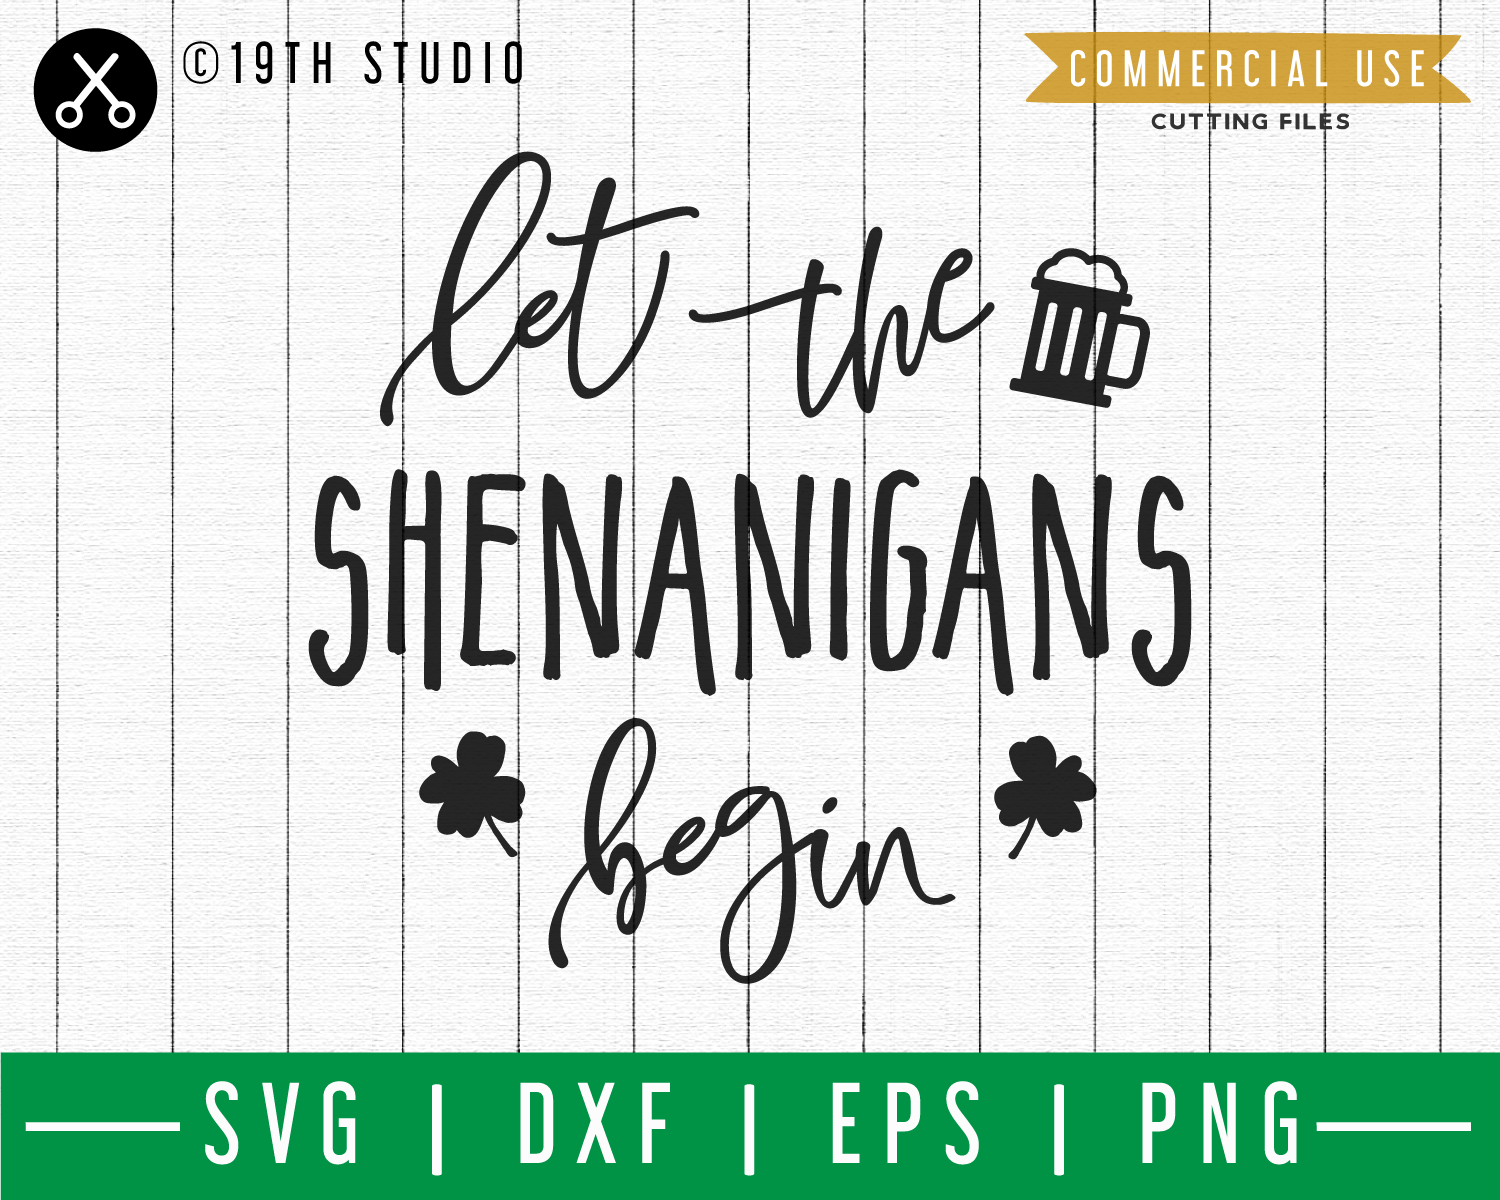 Let the shenanigans begin SVG | A St. Patrick's Day SVG cut file M45F Craft House SVG - SVG files for Cricut and Silhouette